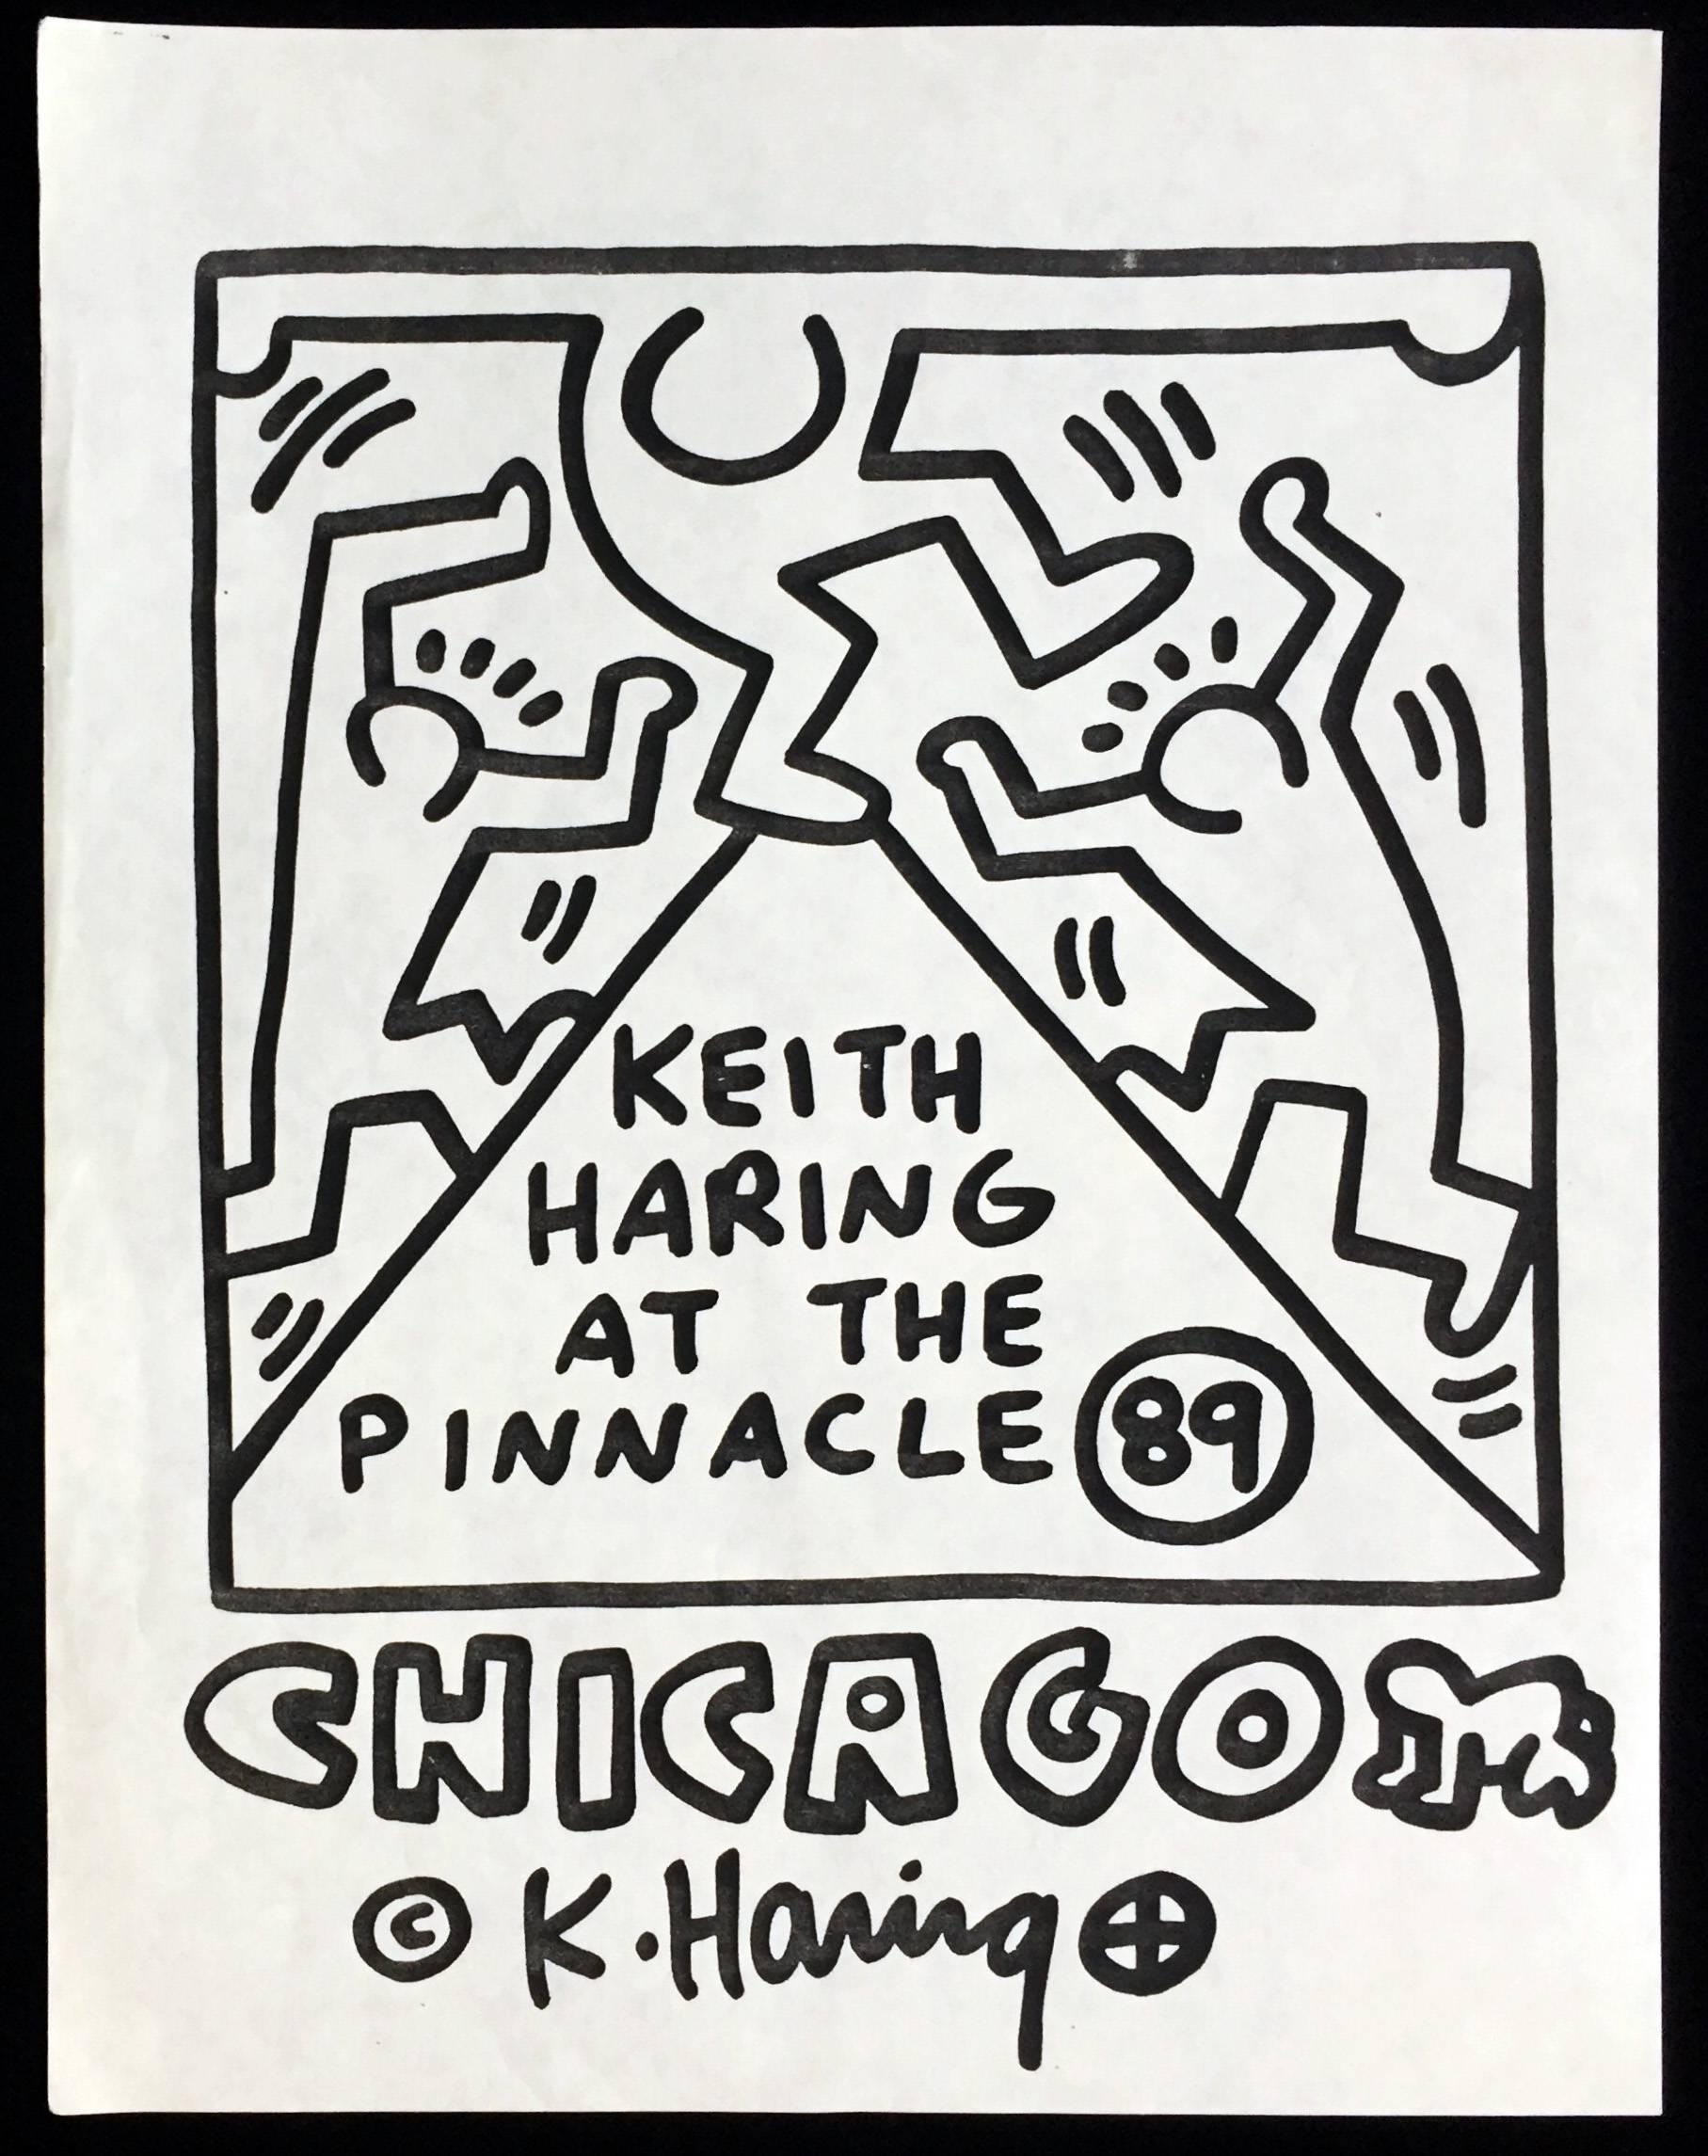 Keith Haring produced this flyer for a large scale public mural project in conjunction with the Chicago Public School system in 1989. An extremely rare Haring collectible that would look superb framed. 

Offset print. 1989. 
8.5 x 11 inches. 
Minor